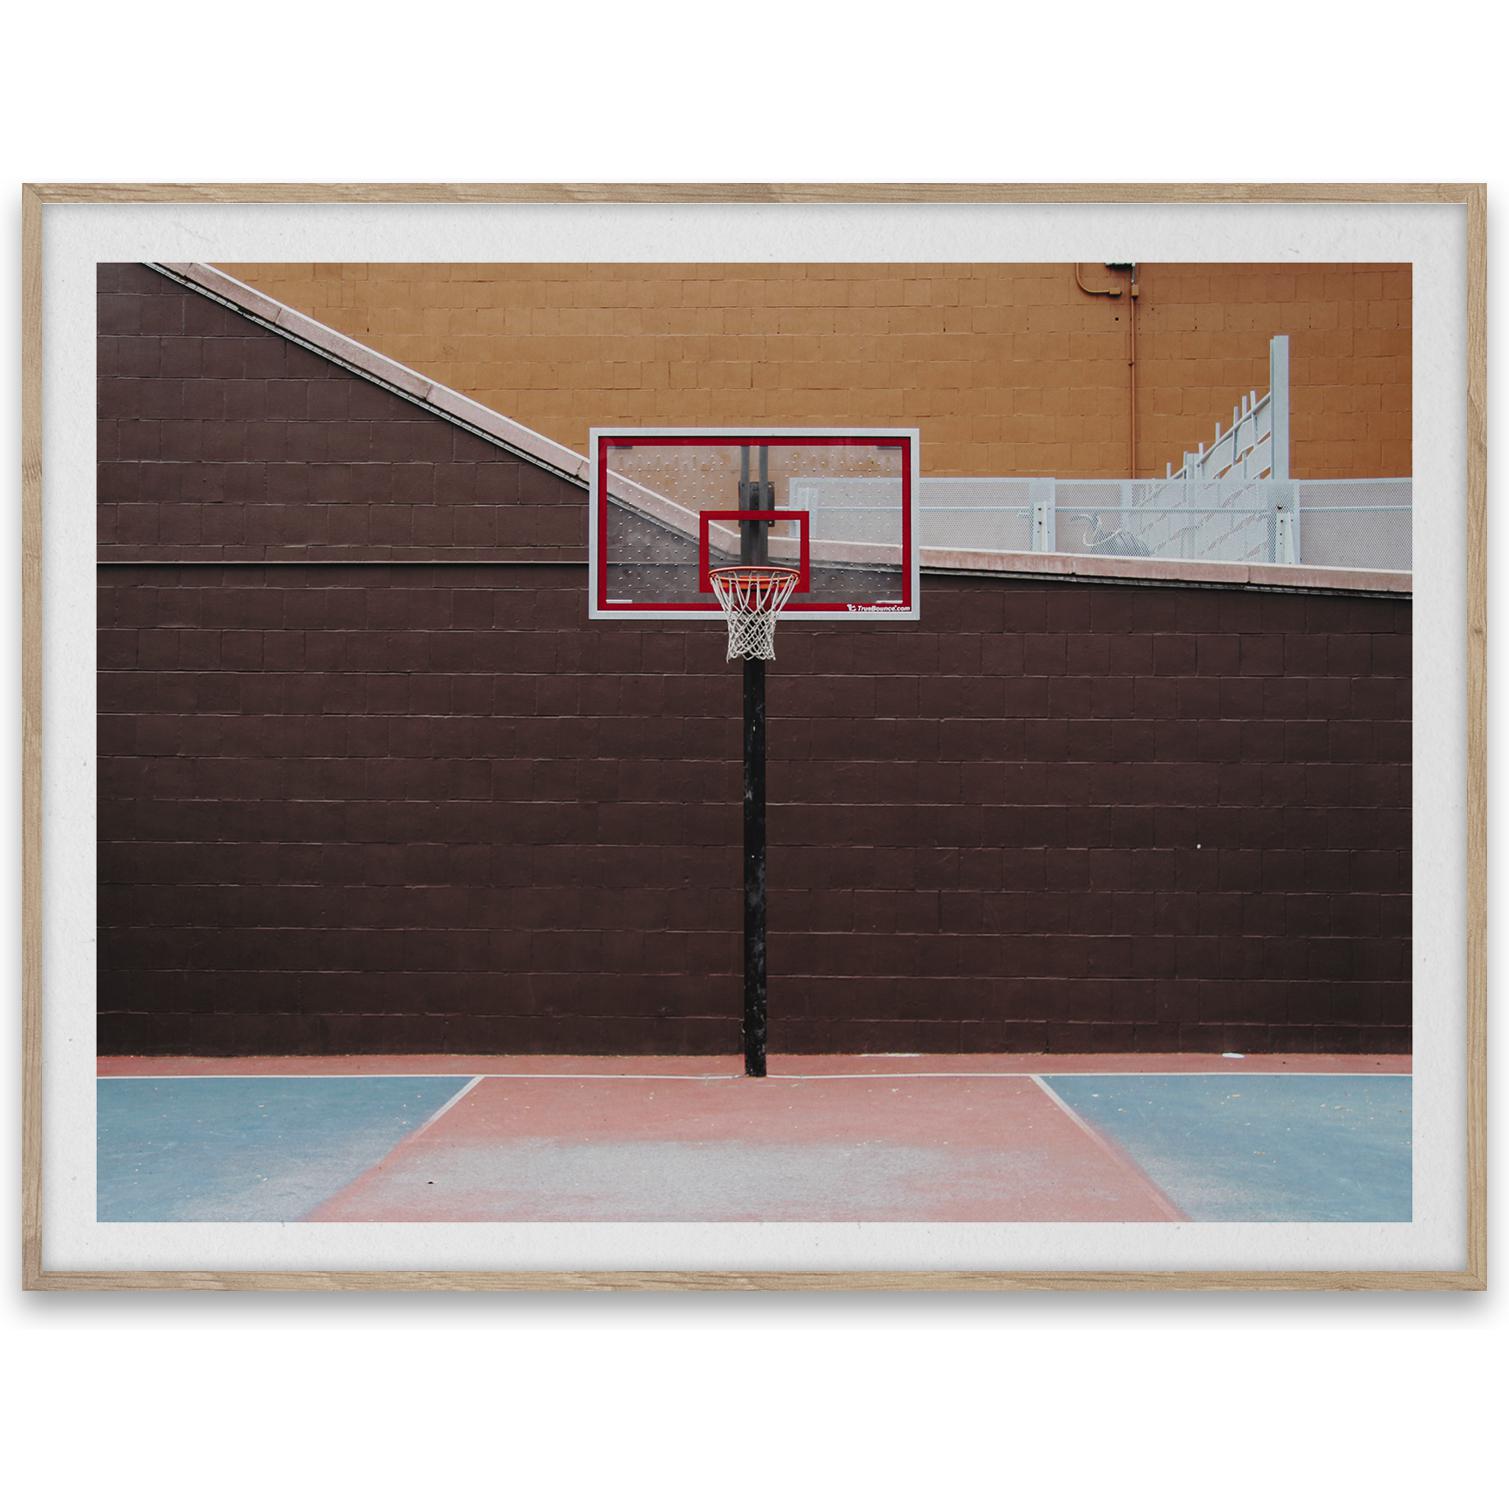 Paper Collective Cities of Basketball 07, New York Poster, 30x40 cm